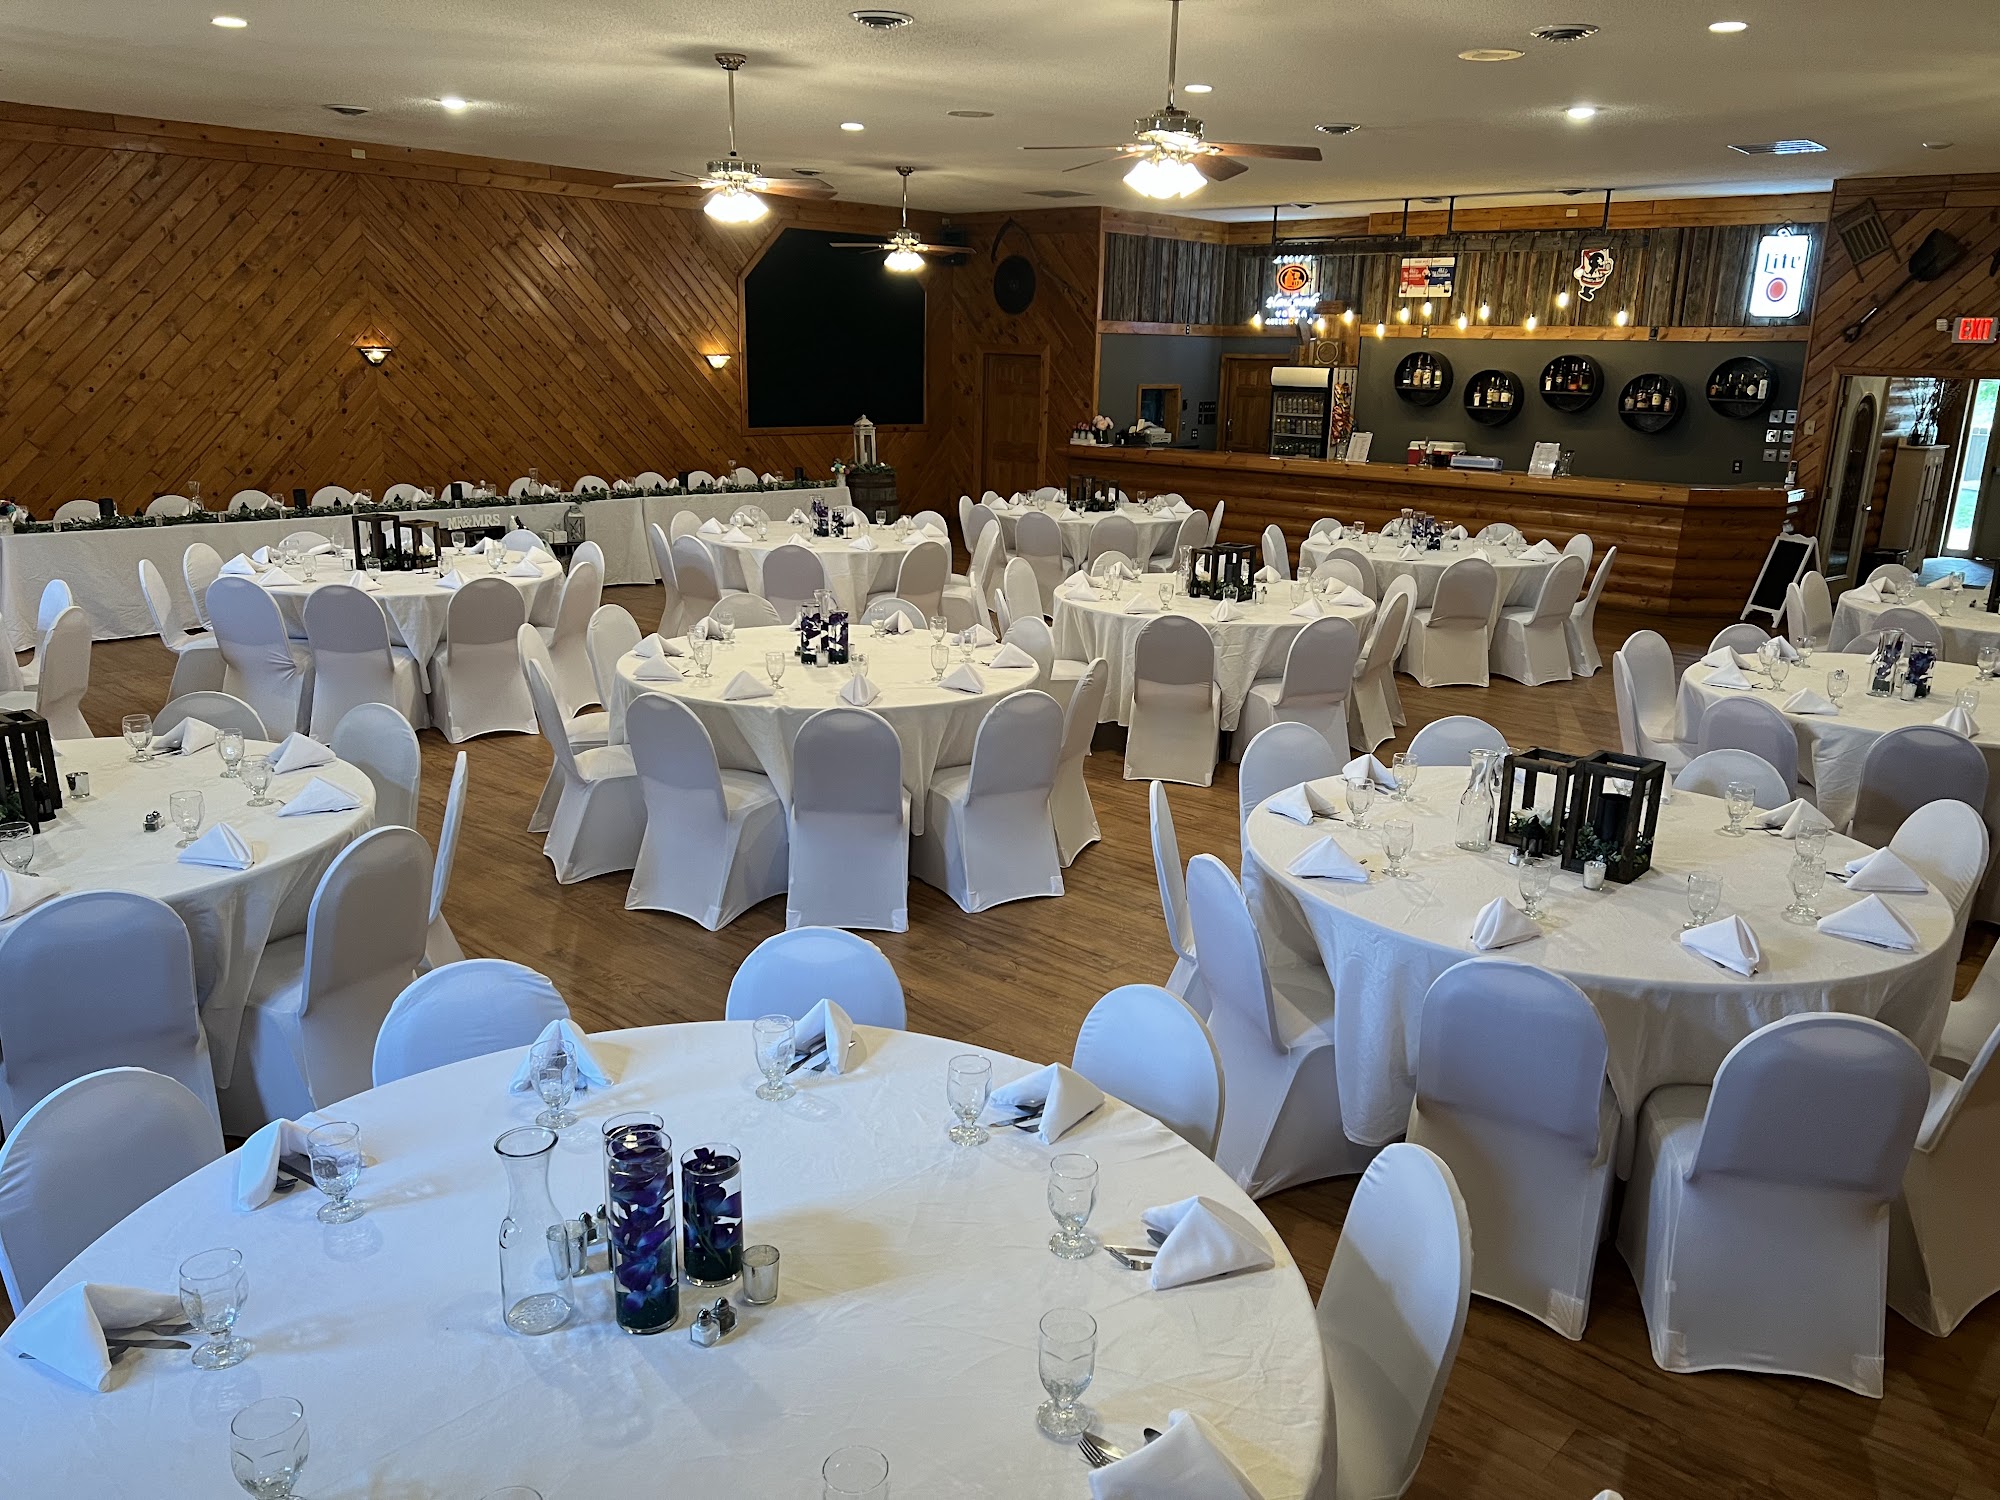 Taconite Canteen & Event Center